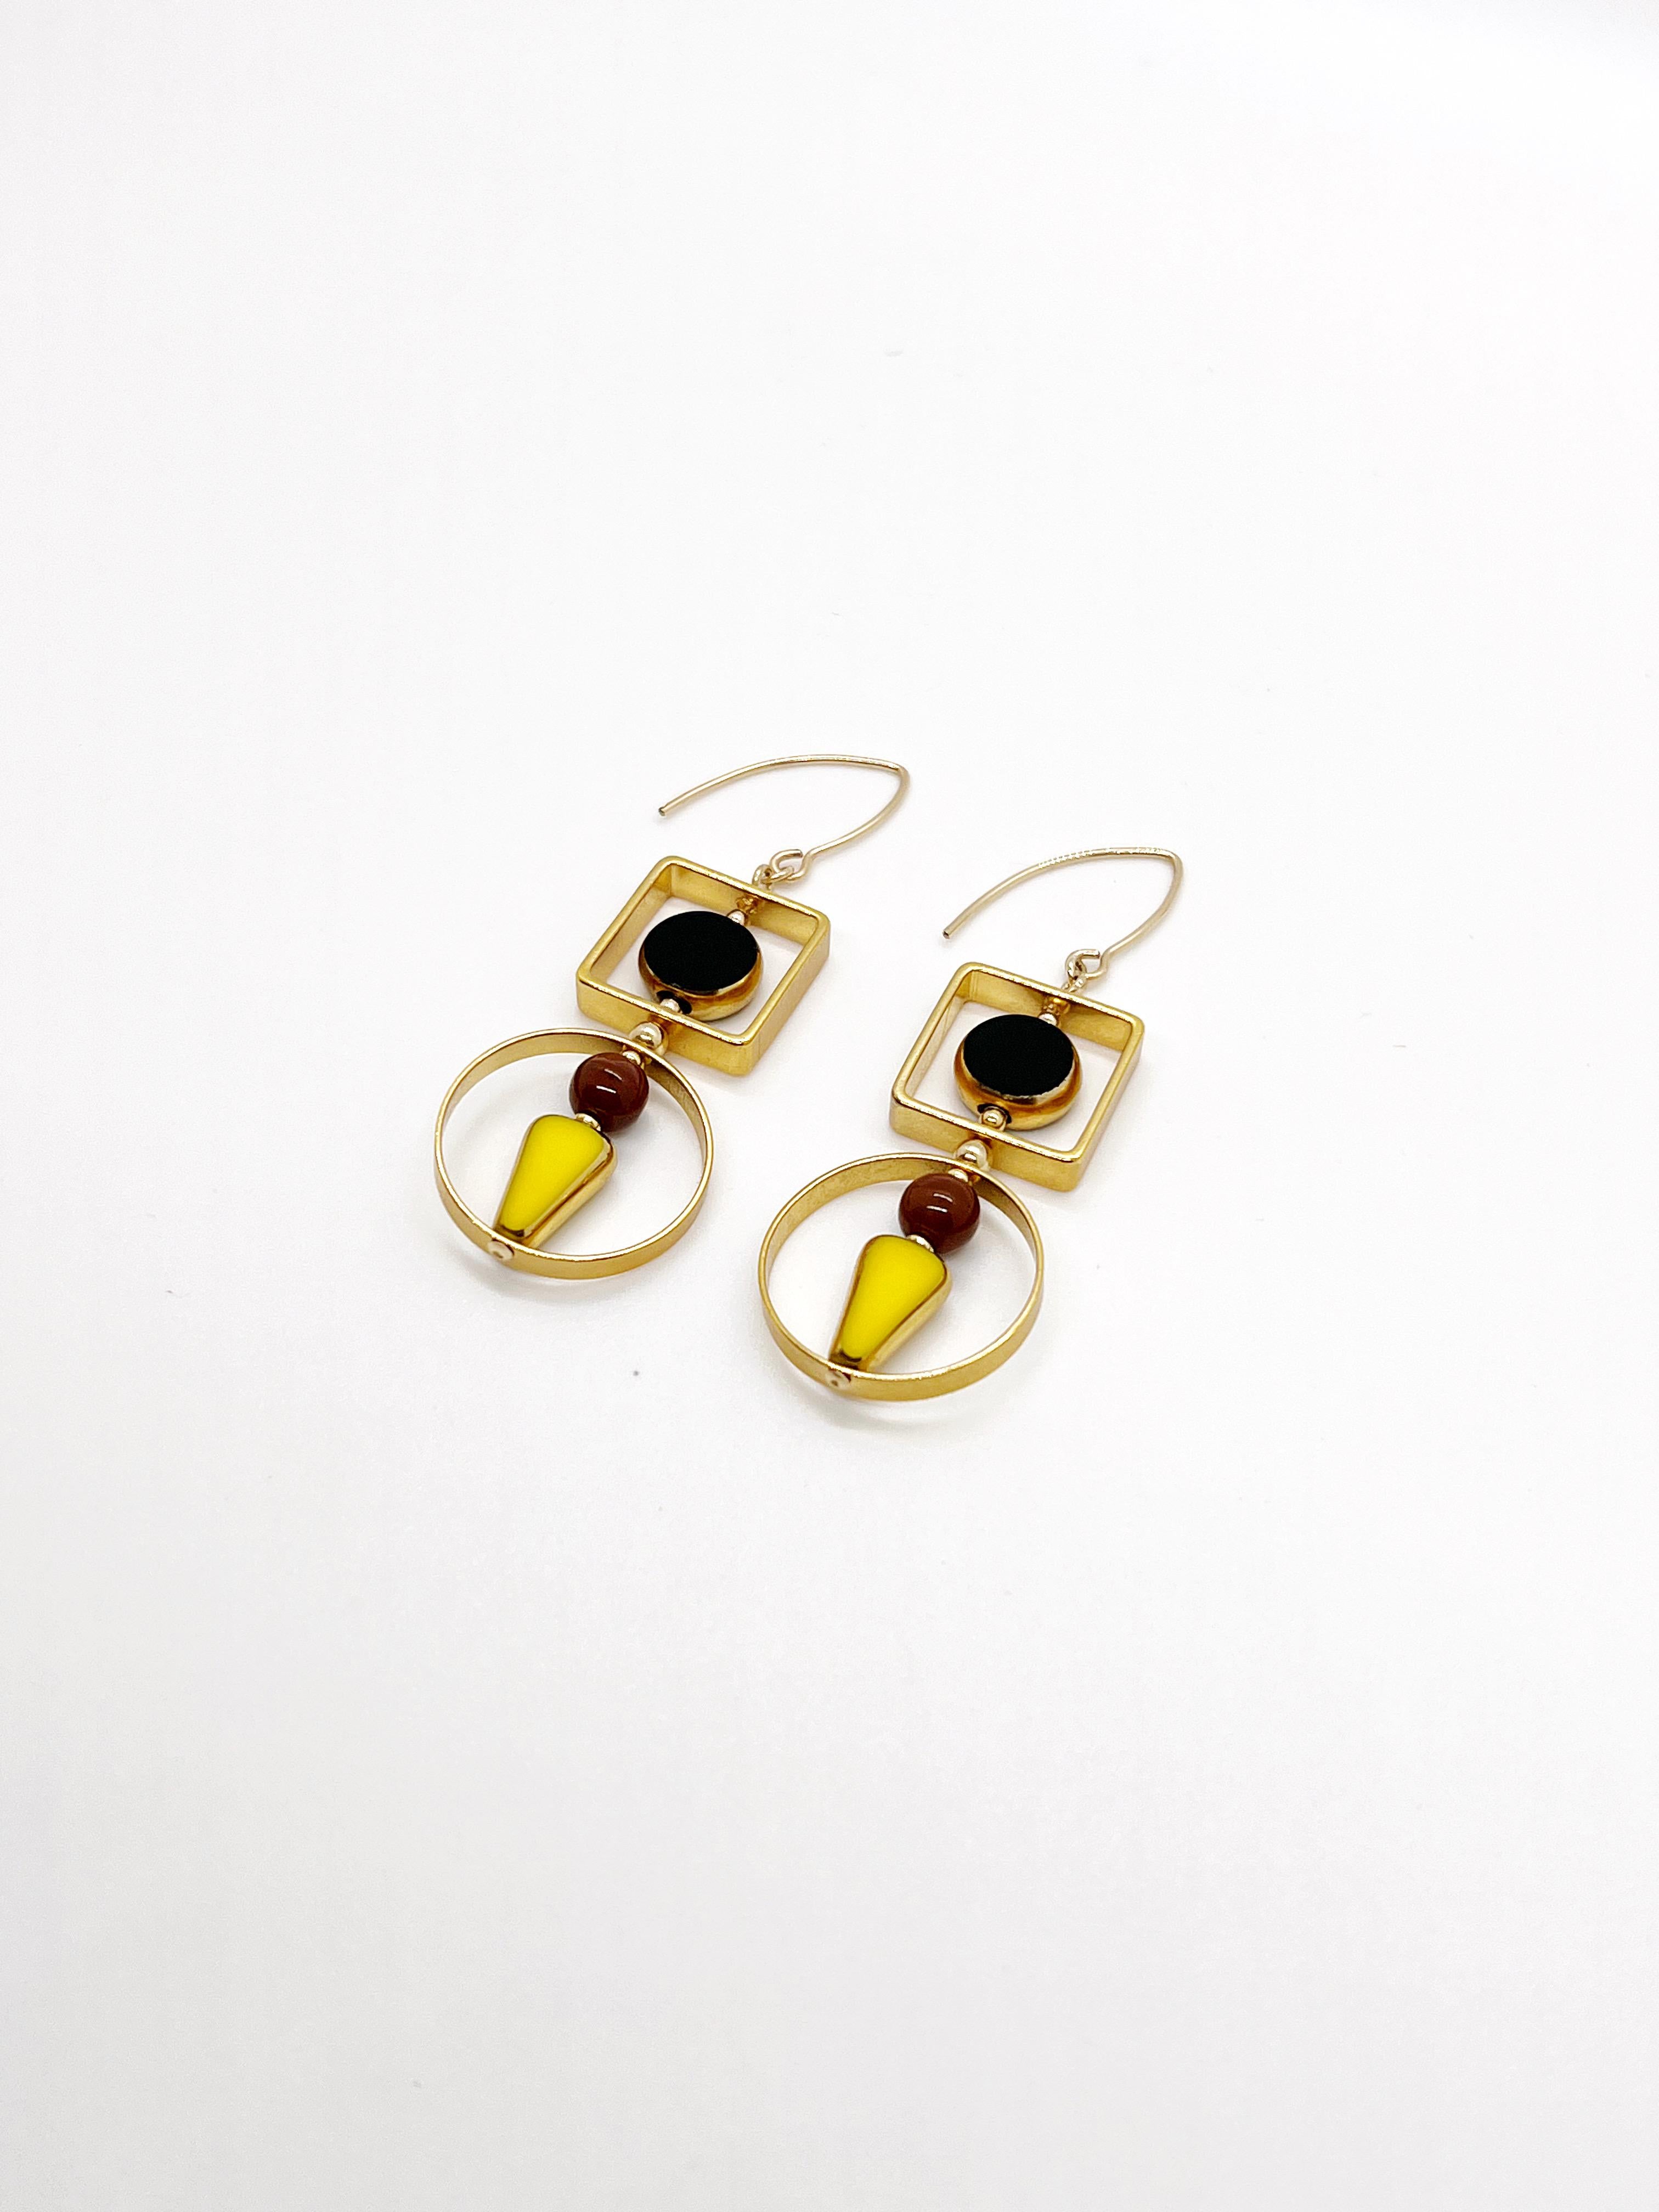 Black & Yellow Vintage German Glass Beads Art Deco 2321E Earrings In New Condition For Sale In Monrovia, CA